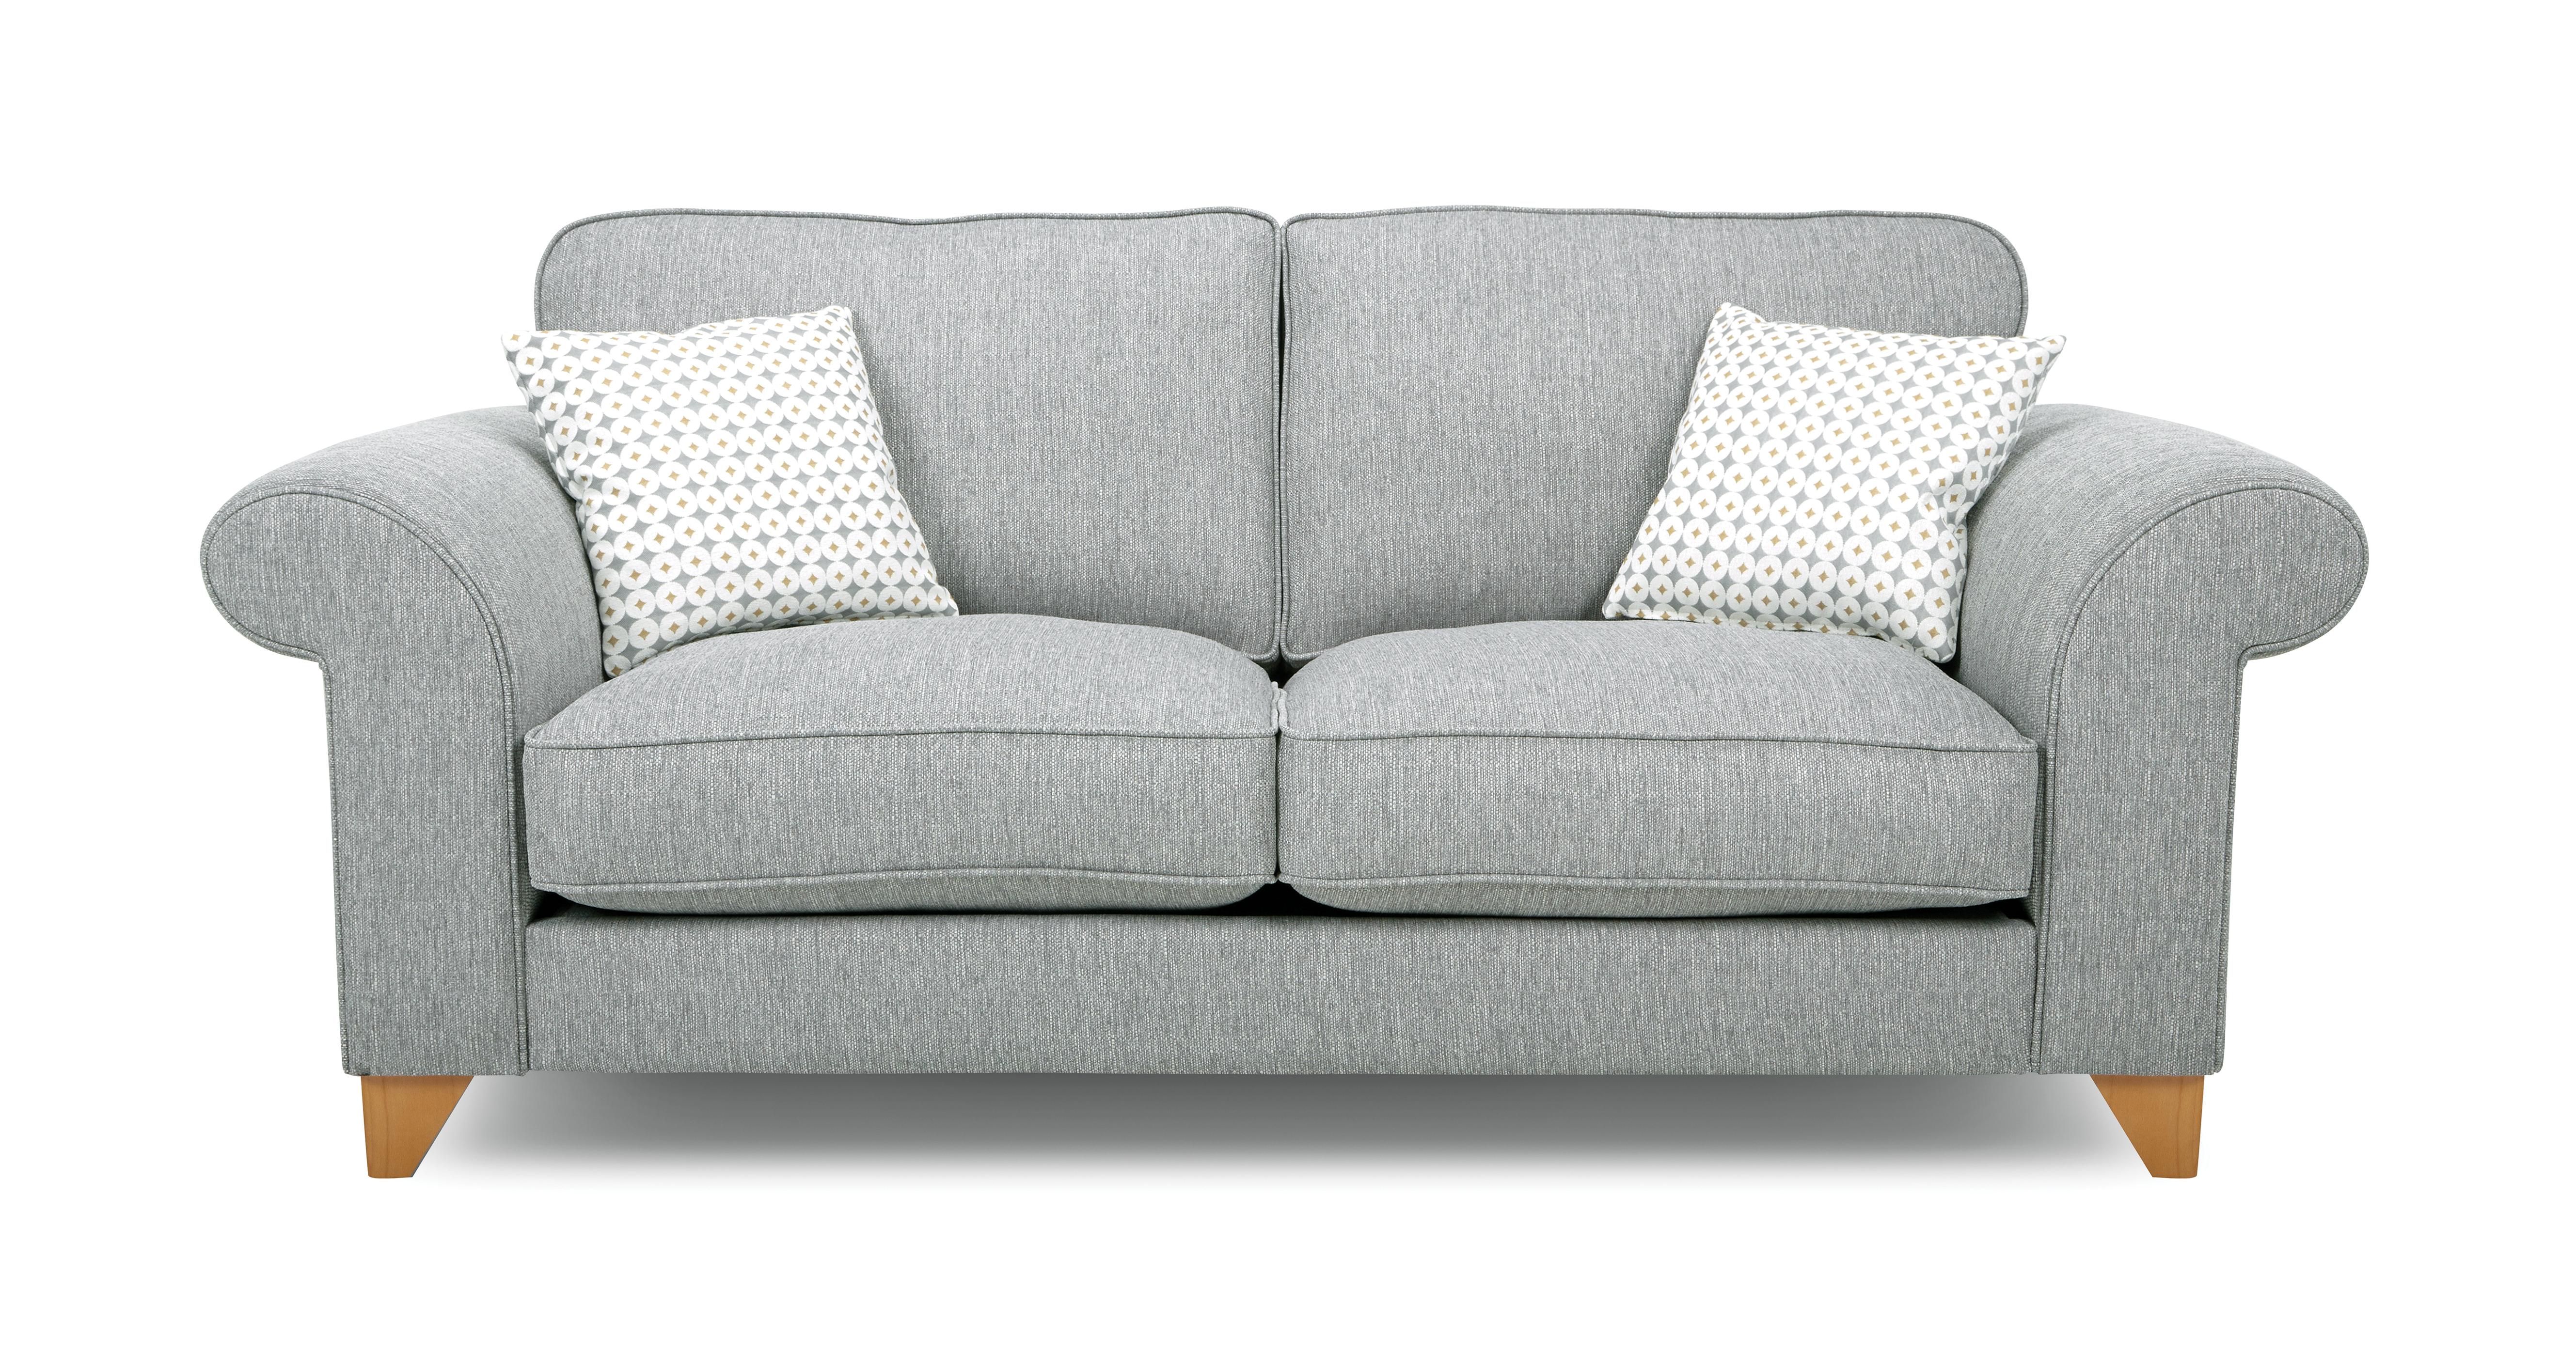 Angelic 2 Seater Sofa Dfs 